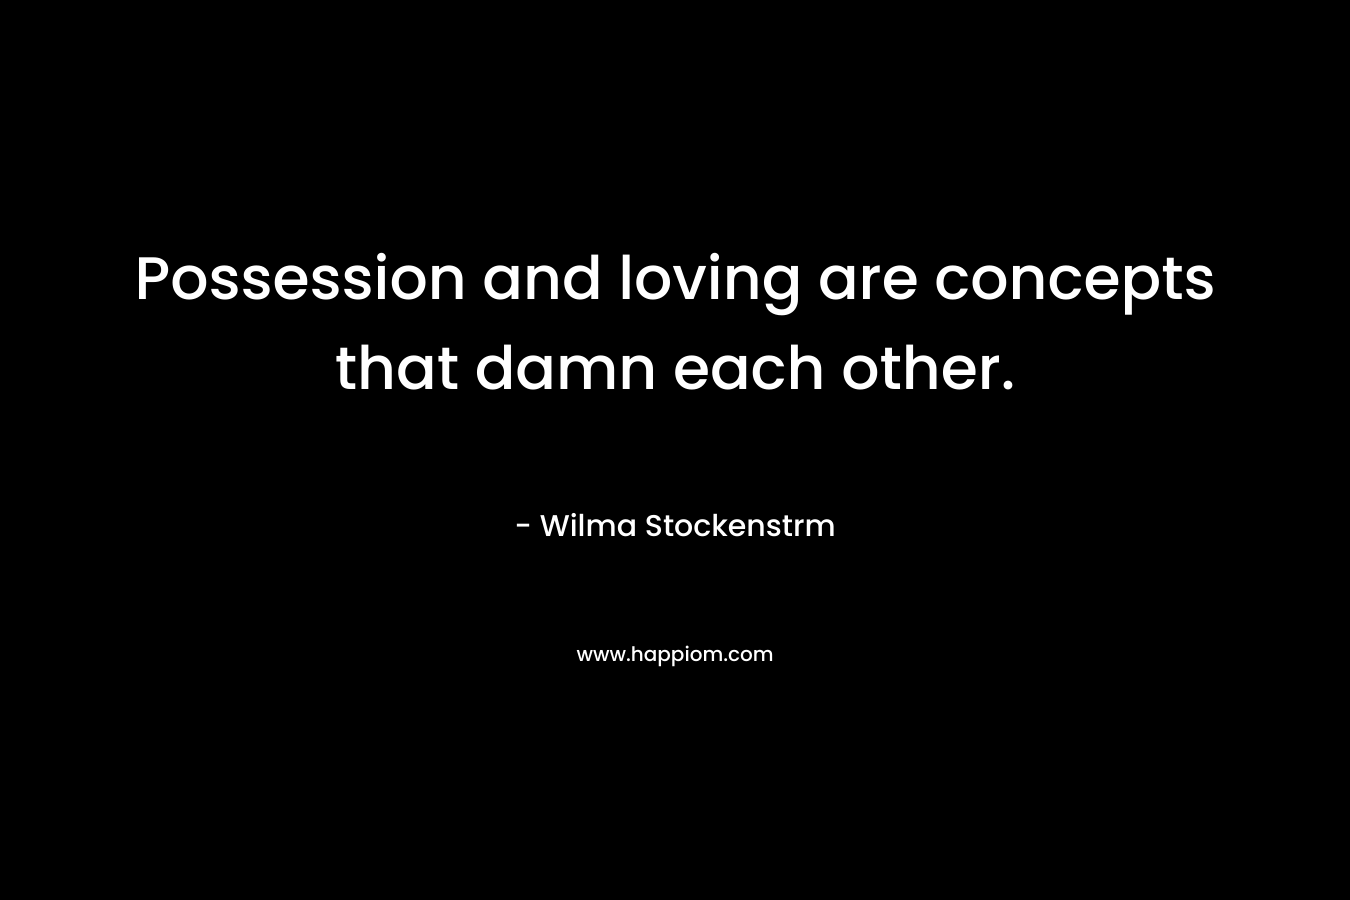 Possession and loving are concepts that damn each other. – Wilma Stockenstrm